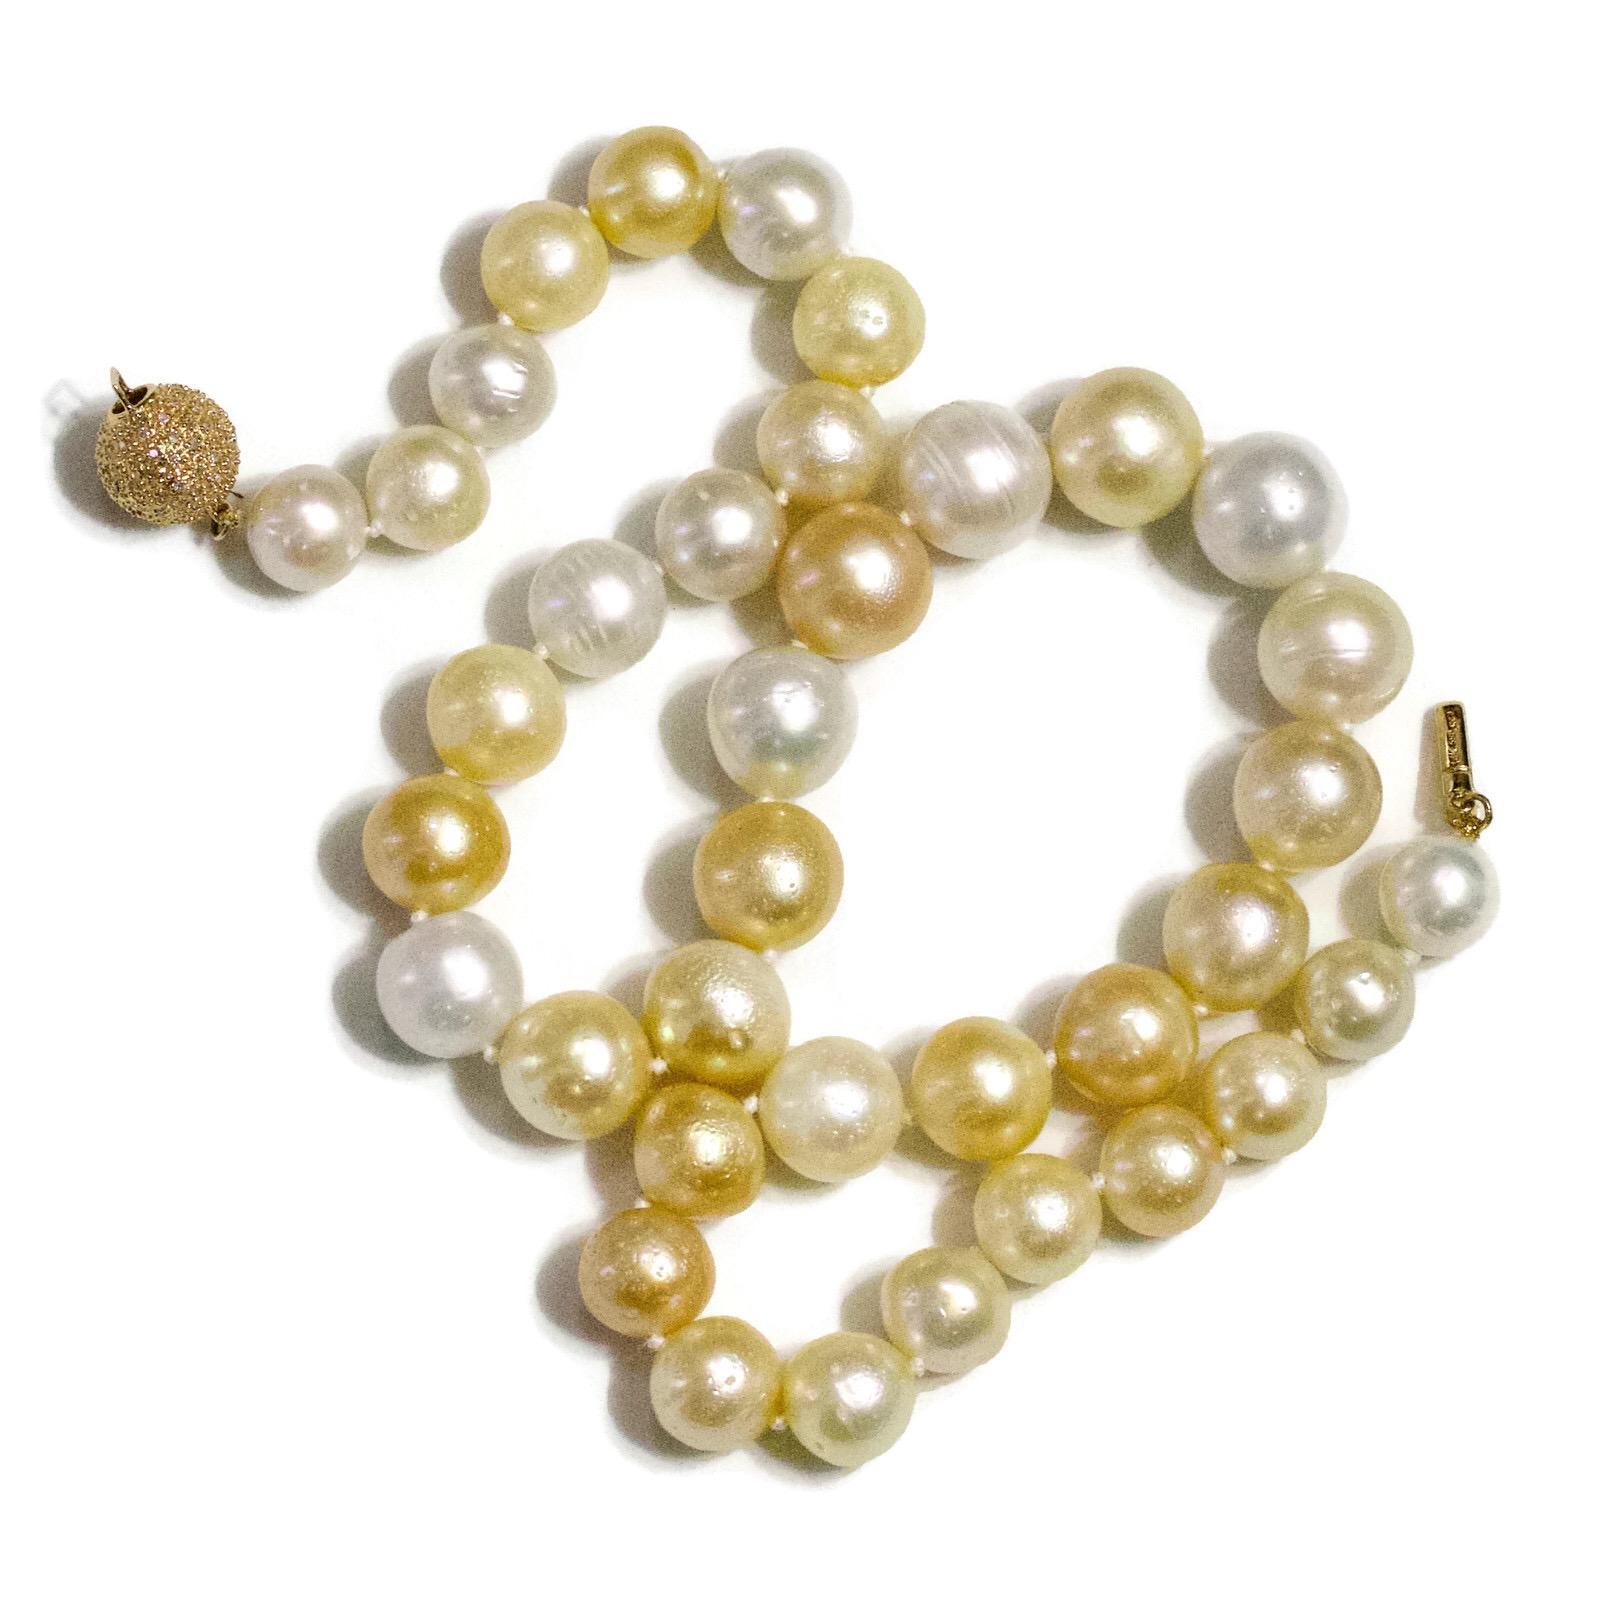 Golden and White South Sea Pearl Necklace with a 14 Karat Gold Diamond Clasp In New Condition For Sale In New York, NY